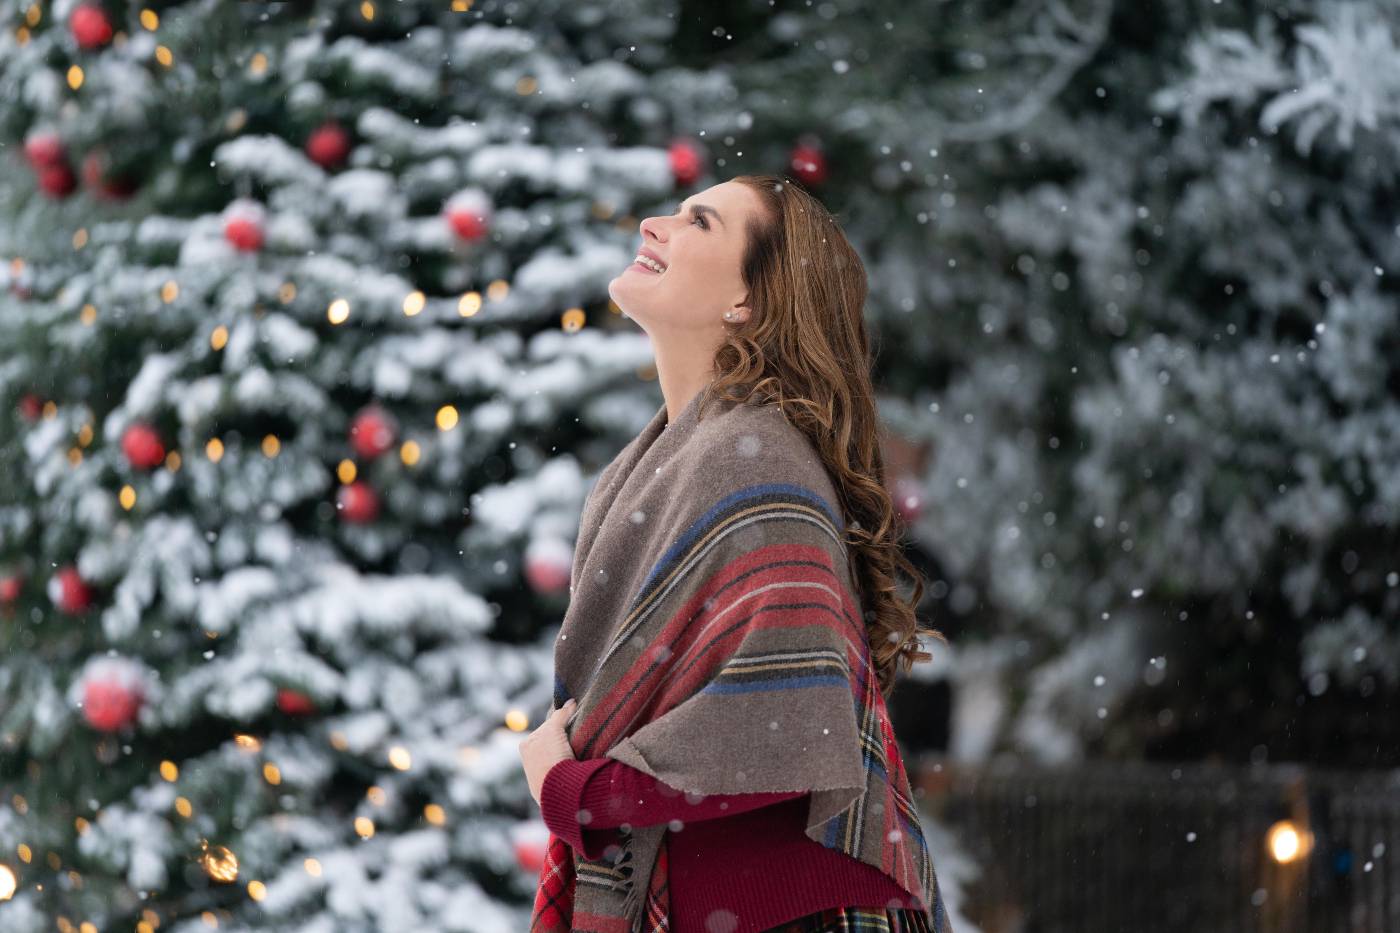 Brooke Shields Cary Elwes Fall In Love In A Castle For Christmas Trailer